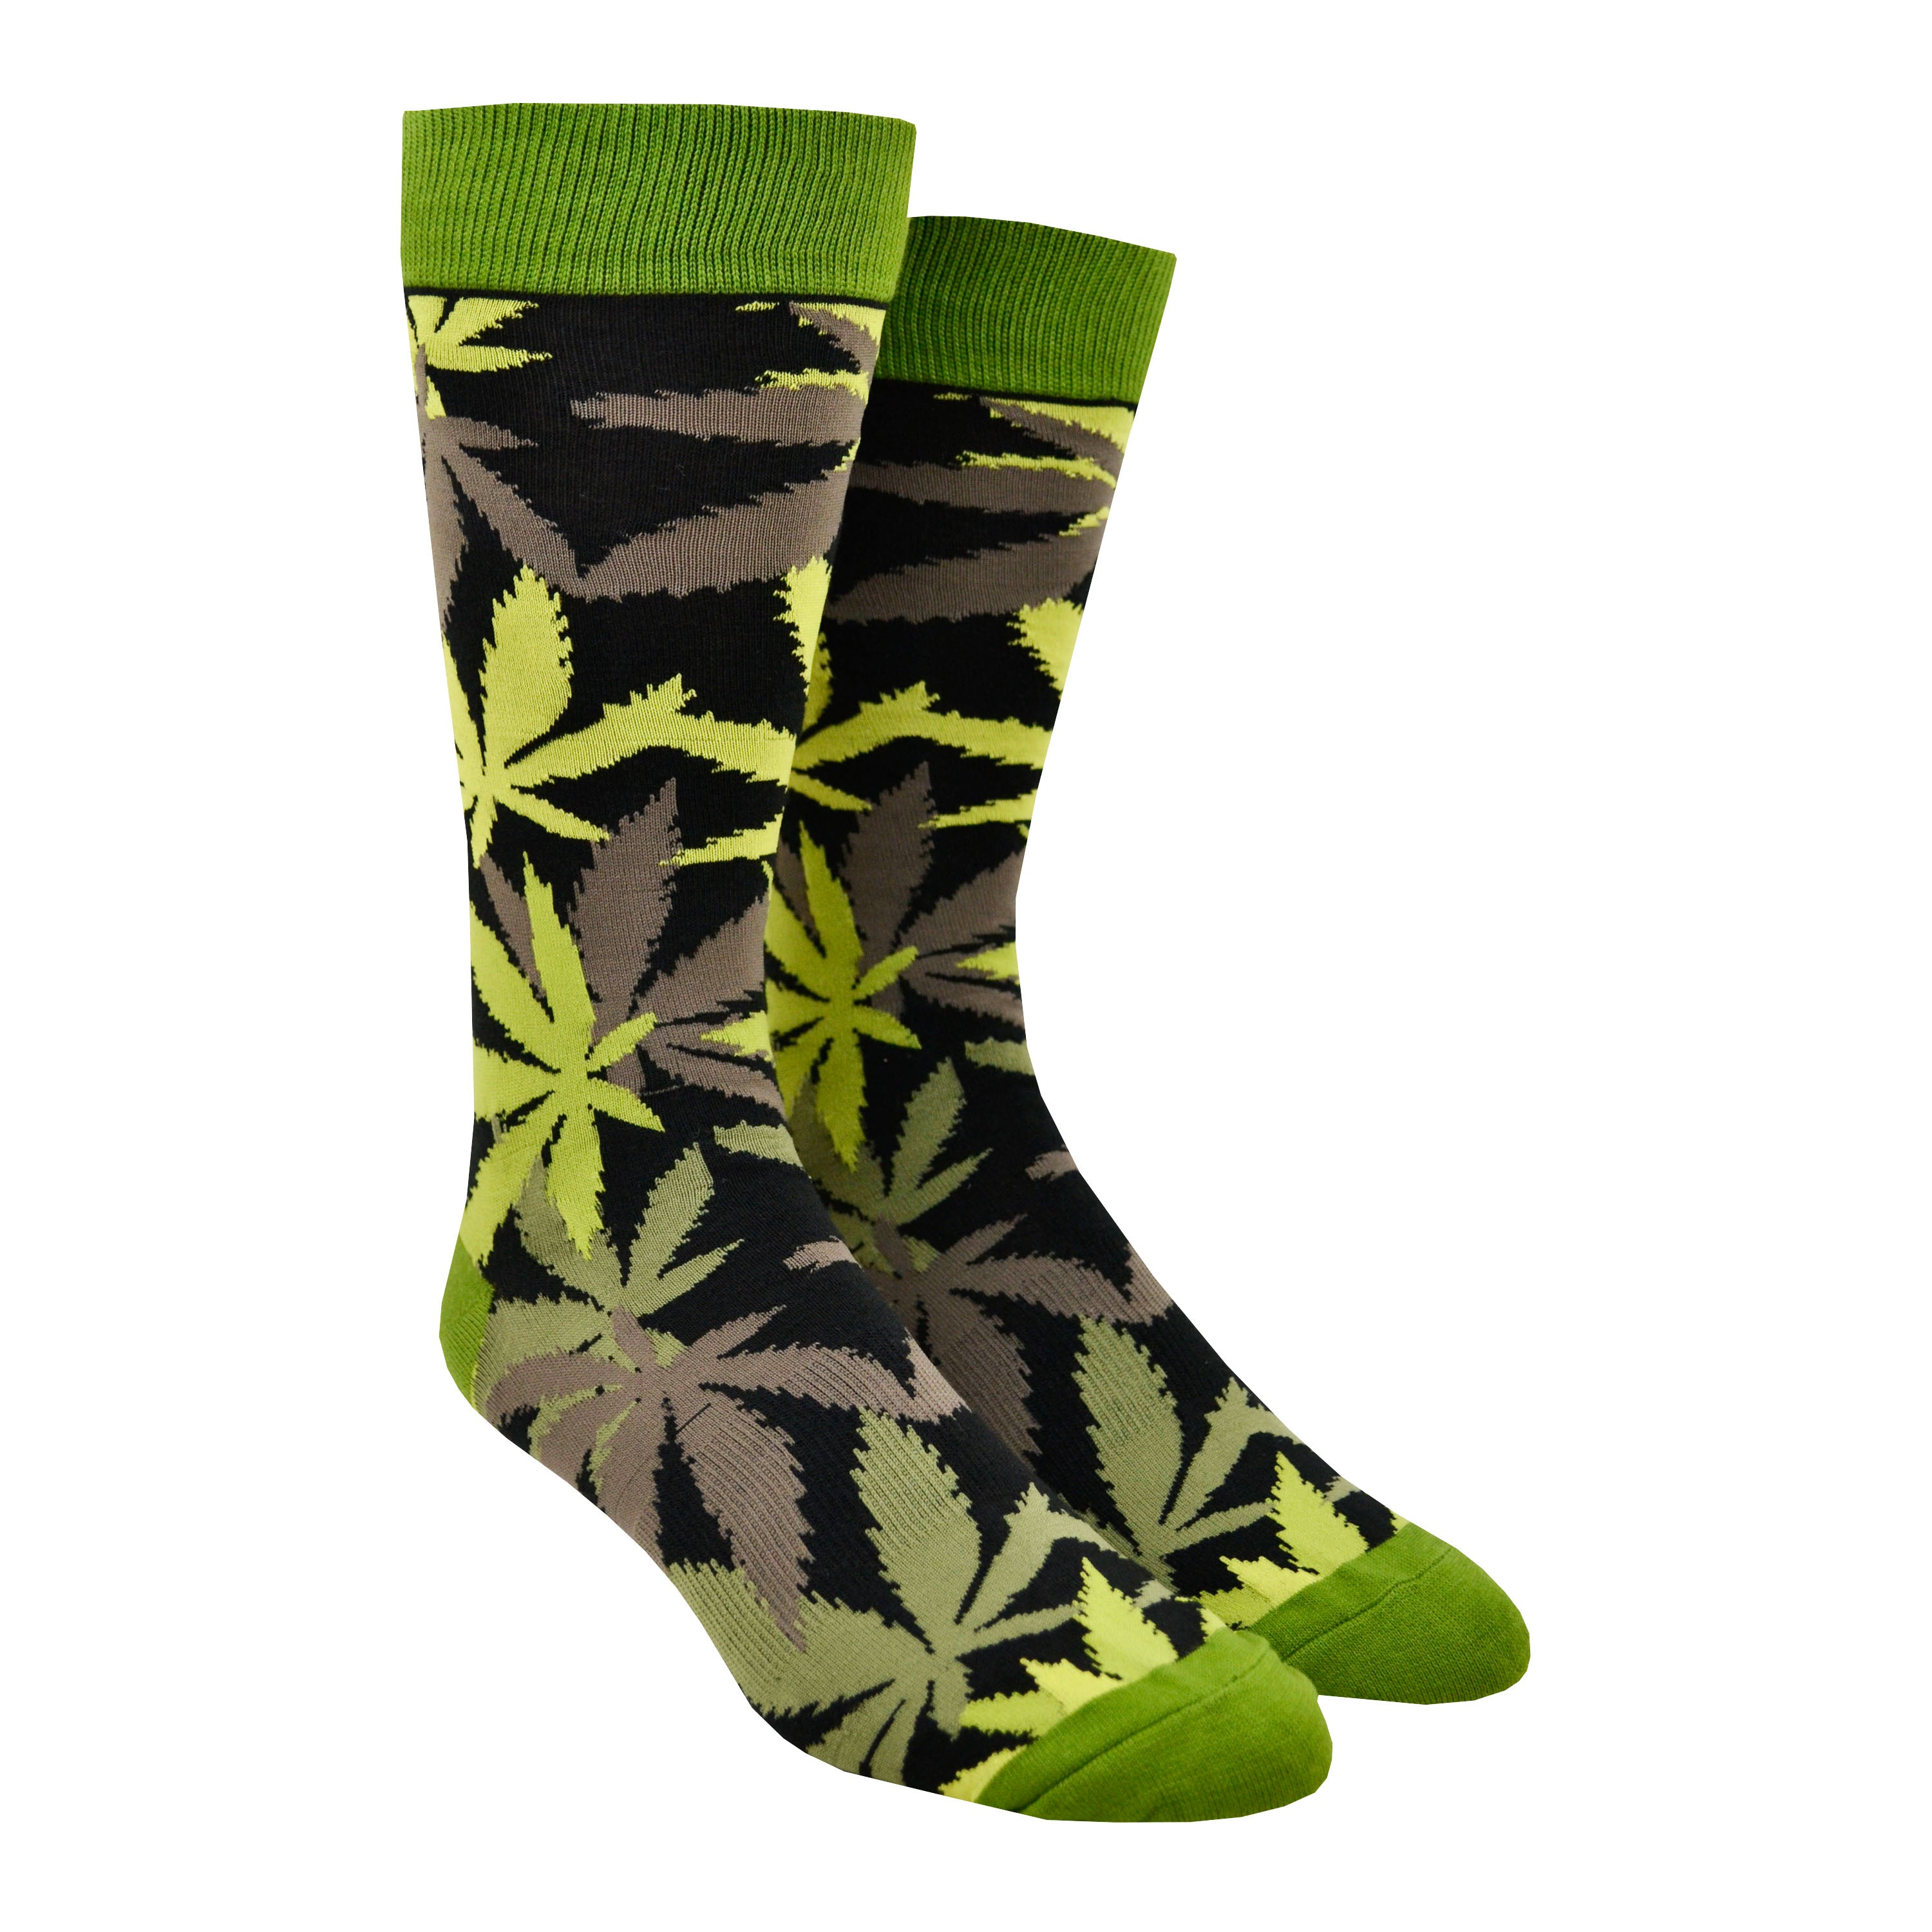 Shown on leg forms, a pair of men's crew length K.Bell brand nylon and cotton socks in black with a bright green heel, toe, and cuff. The sock features an all over motif of marijuana leaves in shades of green and brown.